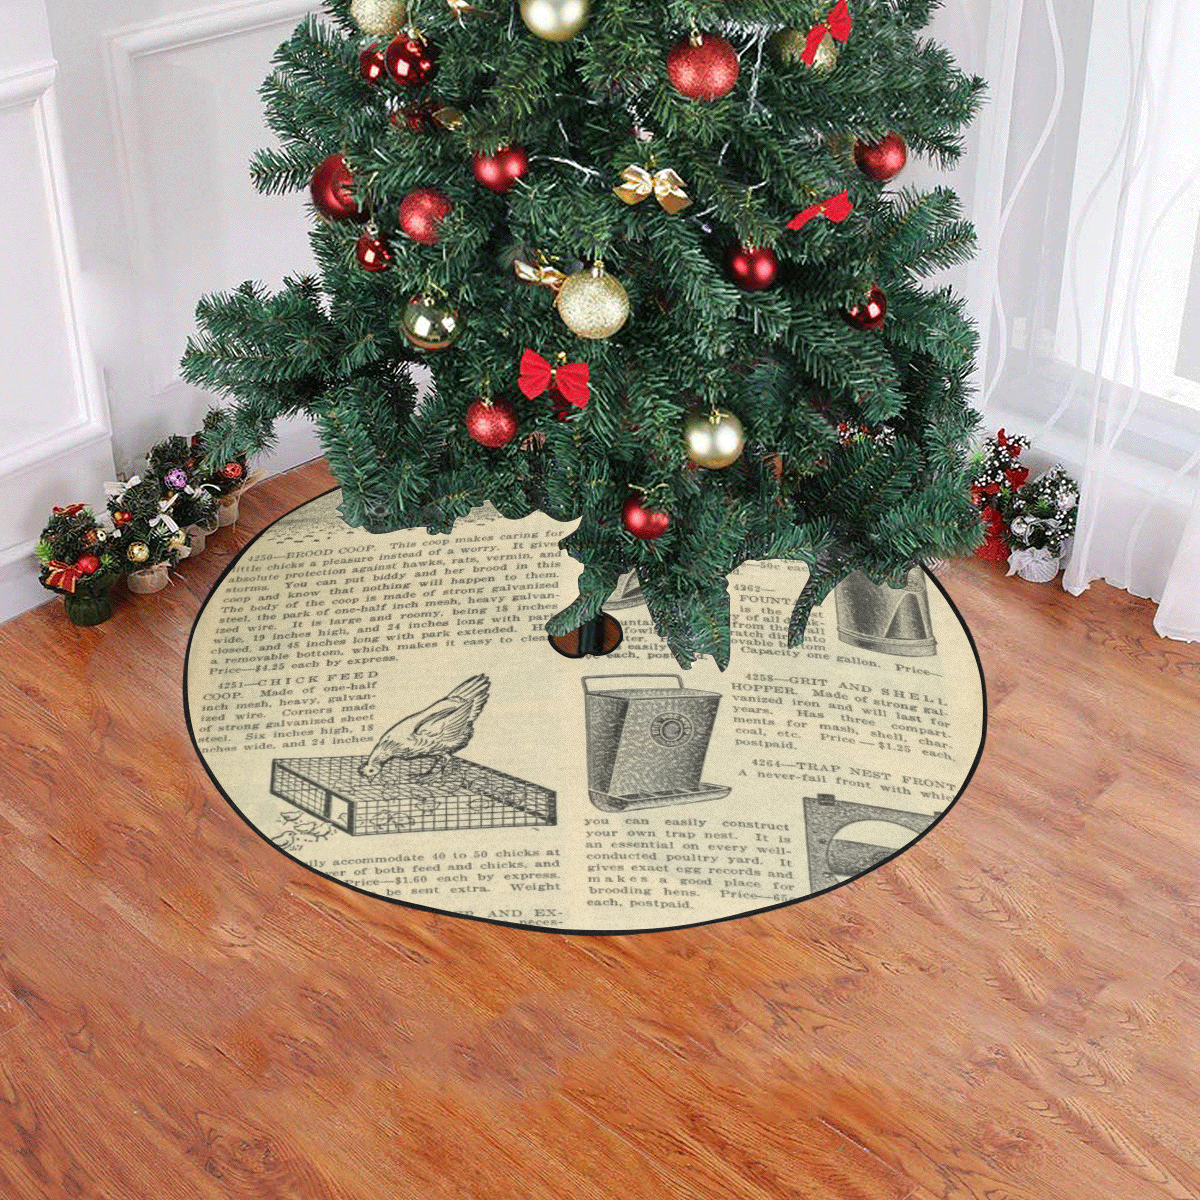 Poultry Supplies Christmas Tree Skirt 47" x 47"